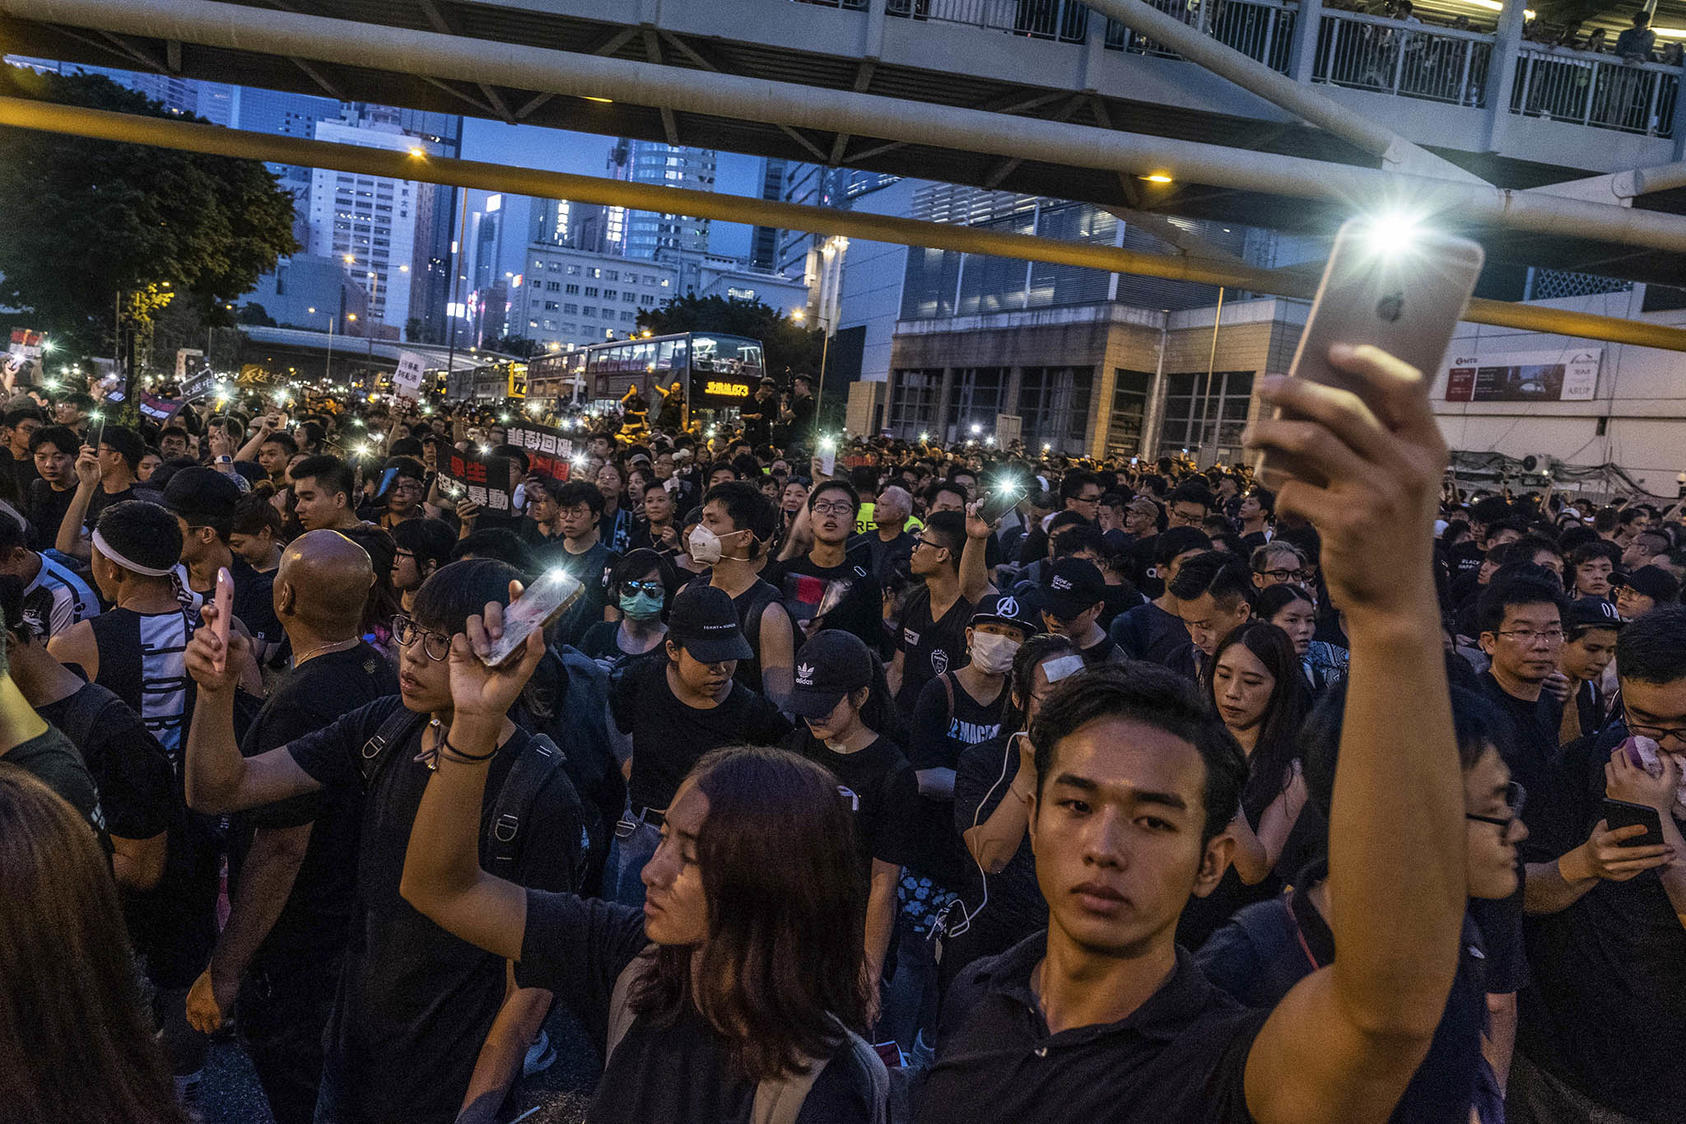 People shine the lights of their smartphones at a demonstration in Hong Kong on June 16, 2019, to commemorate the death of a fellow protester. (Lam Yik Fei/New York Times)